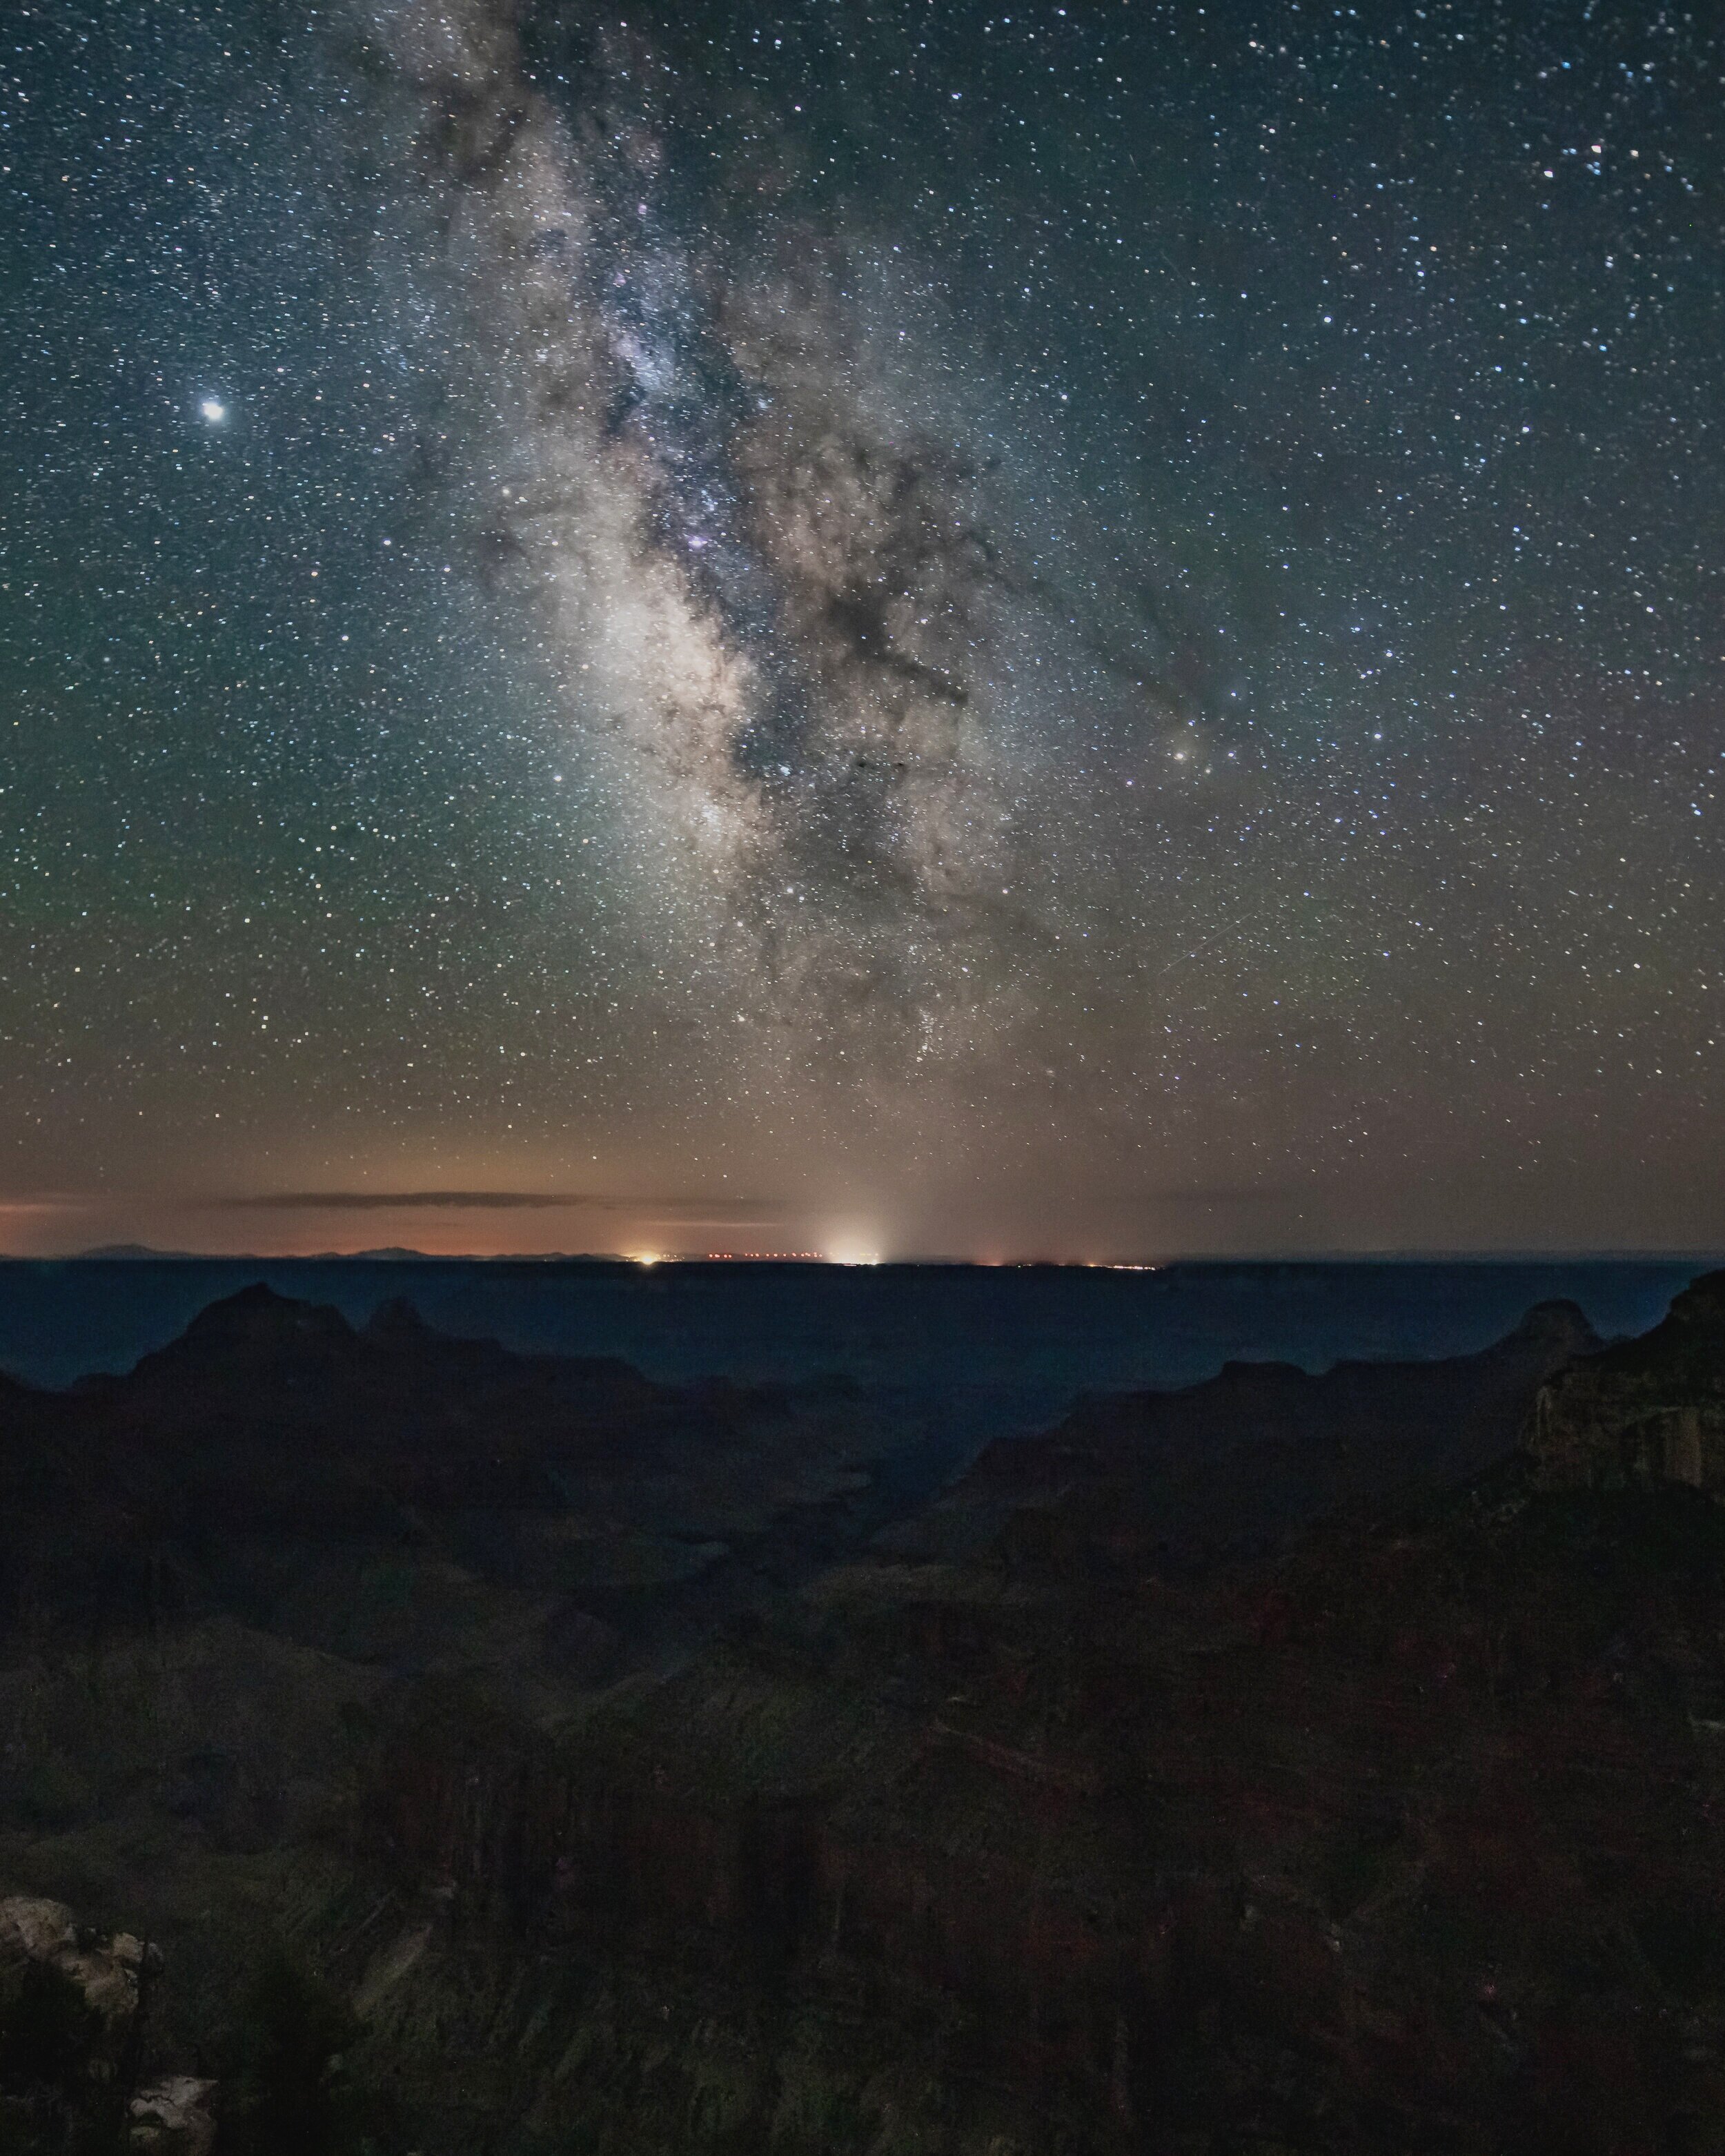 Grand Canyon and the Milky Way